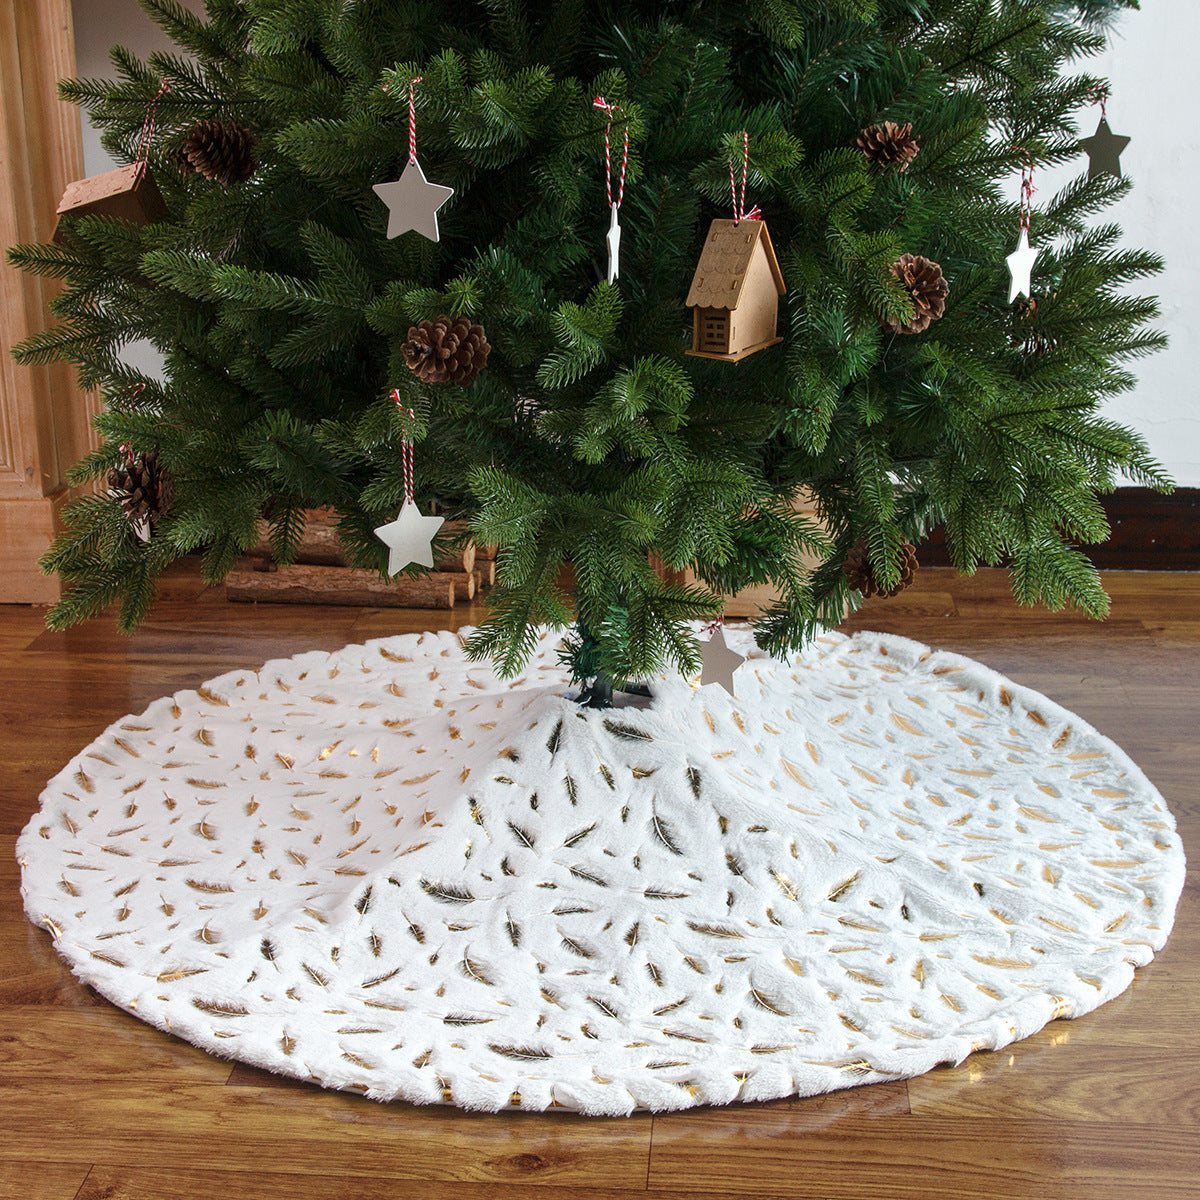 White Plush Christmas Tree Skirt: Add a Touch of Elegance to Your Holiday Décor